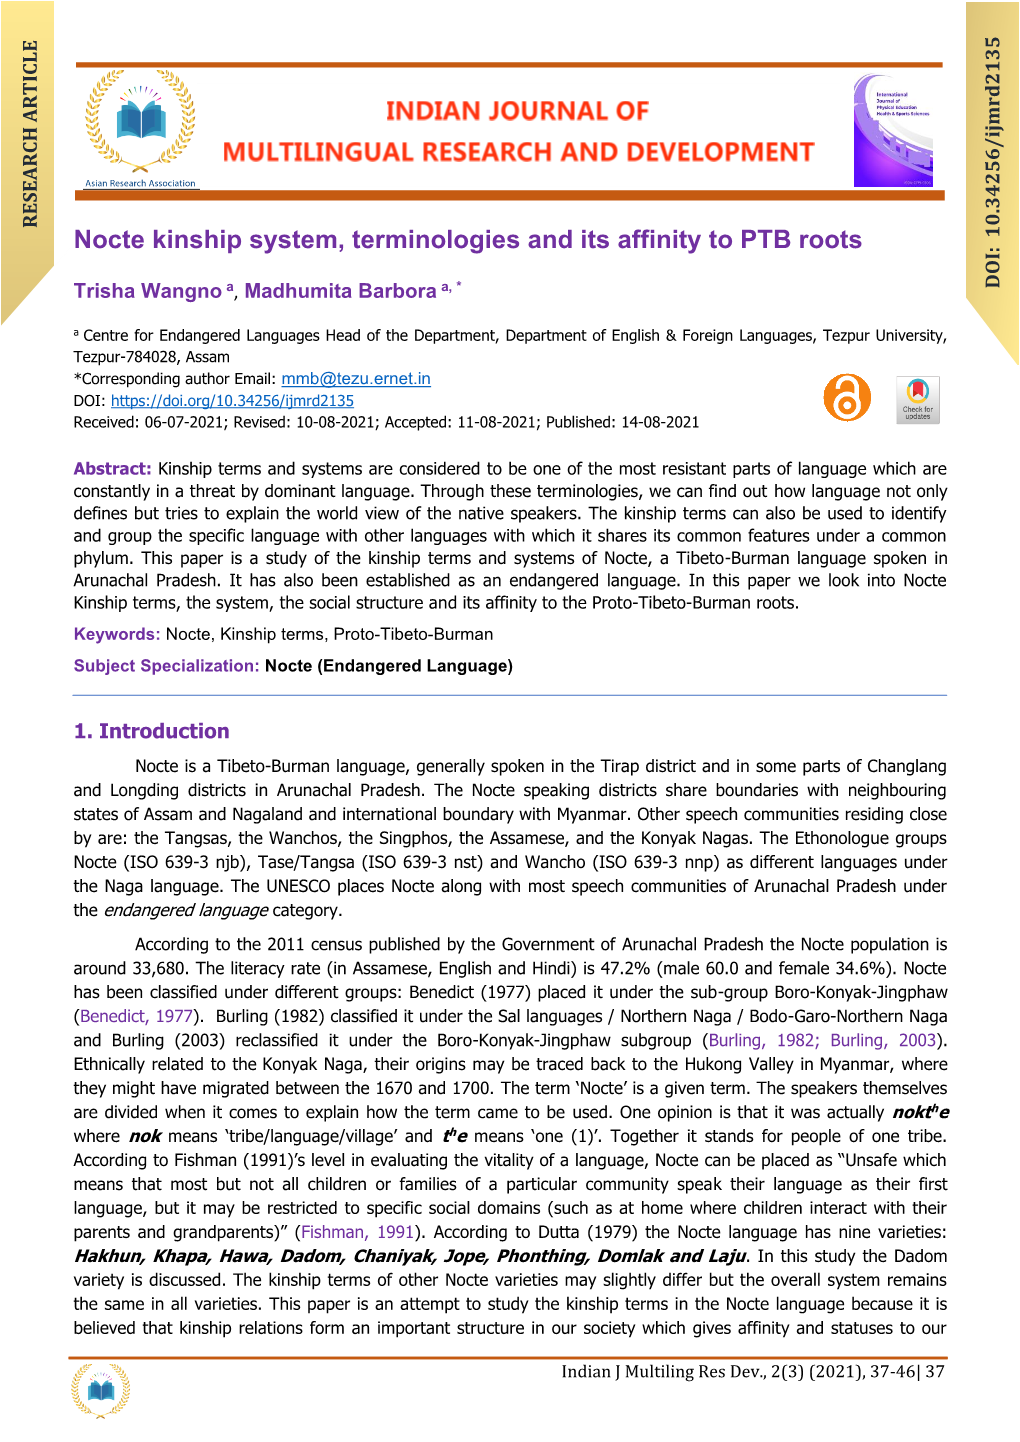 Nocte Kinship System, Terminologies and Its Affinity to PTB Roots, Indian Journal of Multilingual Research and Development, Vol 2, Iss 3, (2021) 37-46